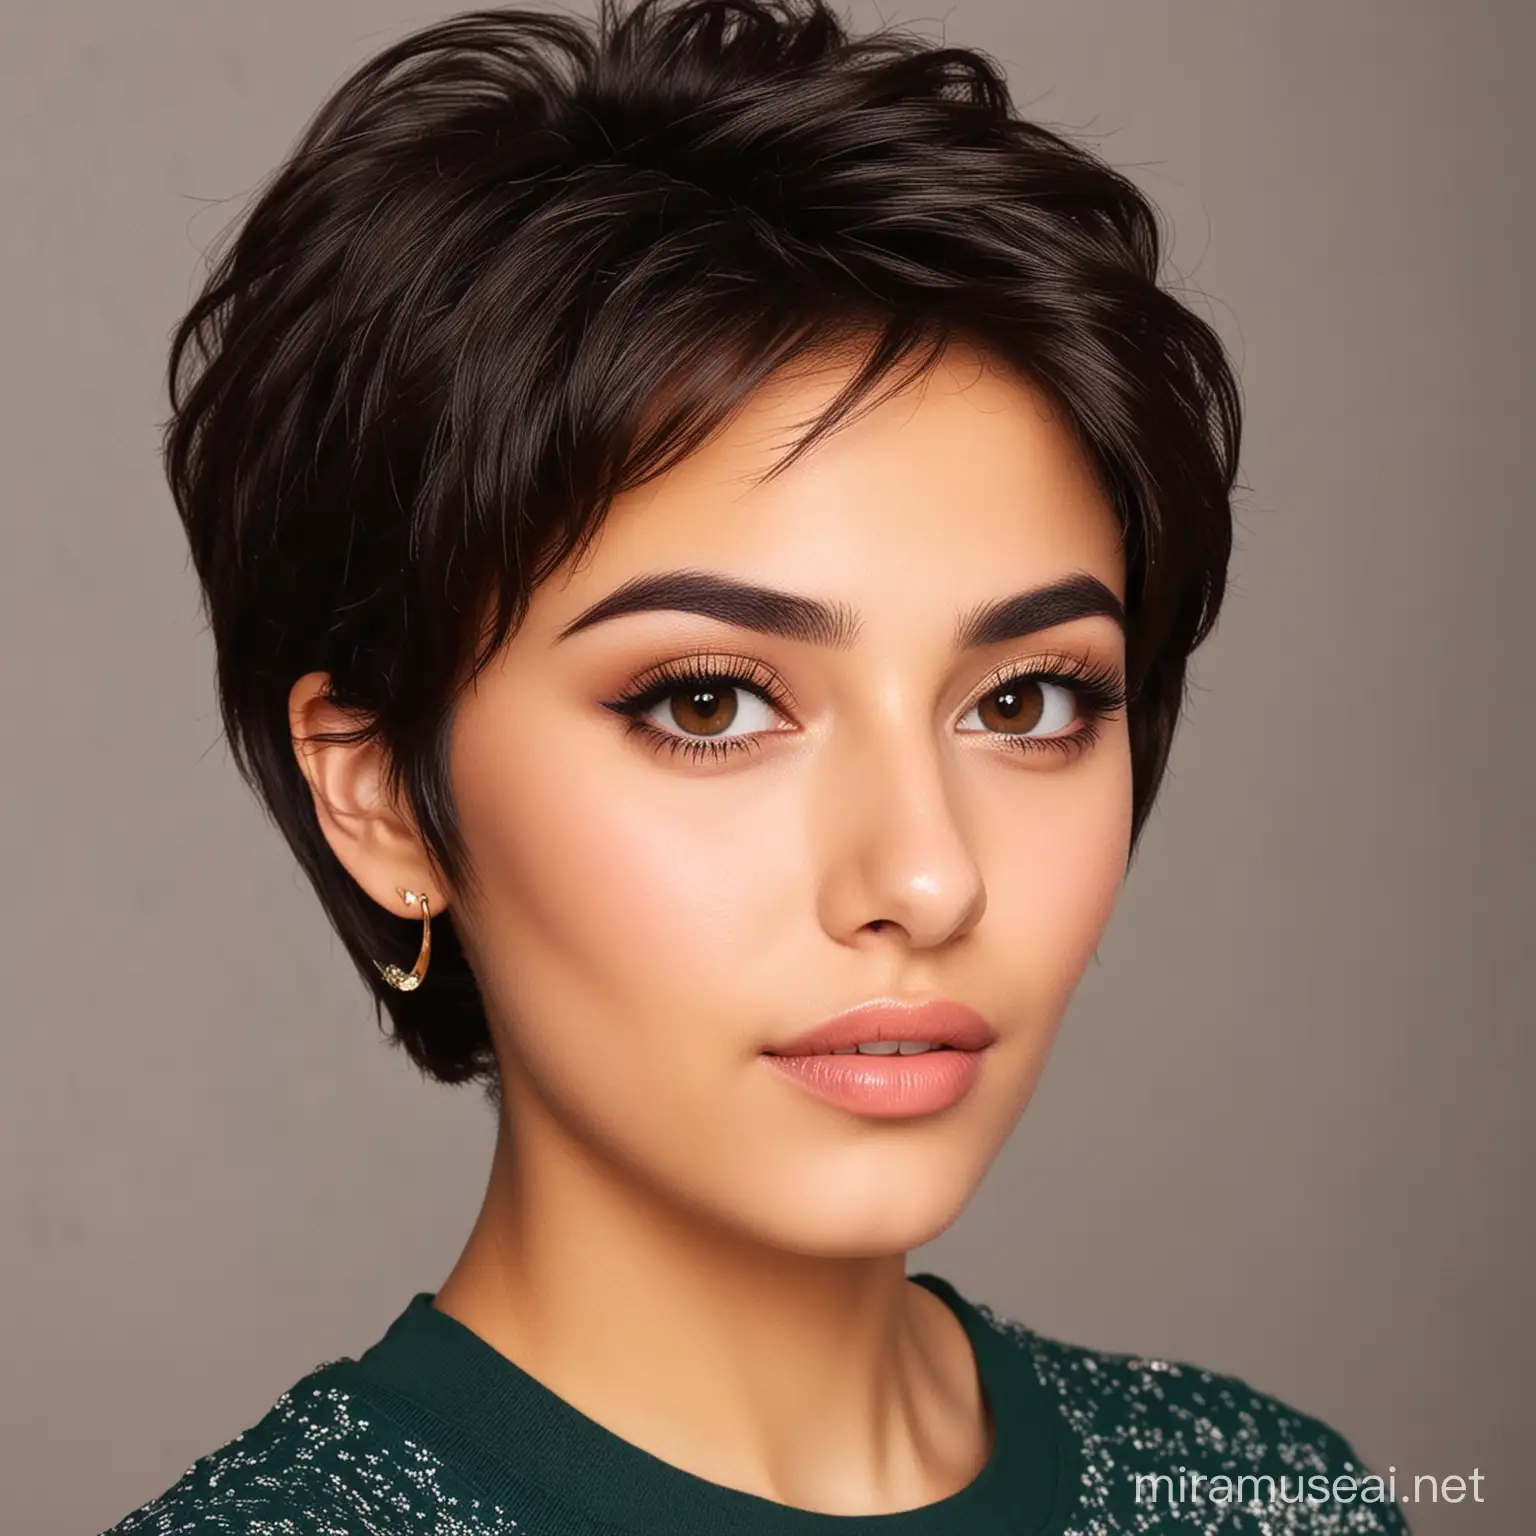 Portrait of a Stylish 20YearOld Arab Woman with Short Hair